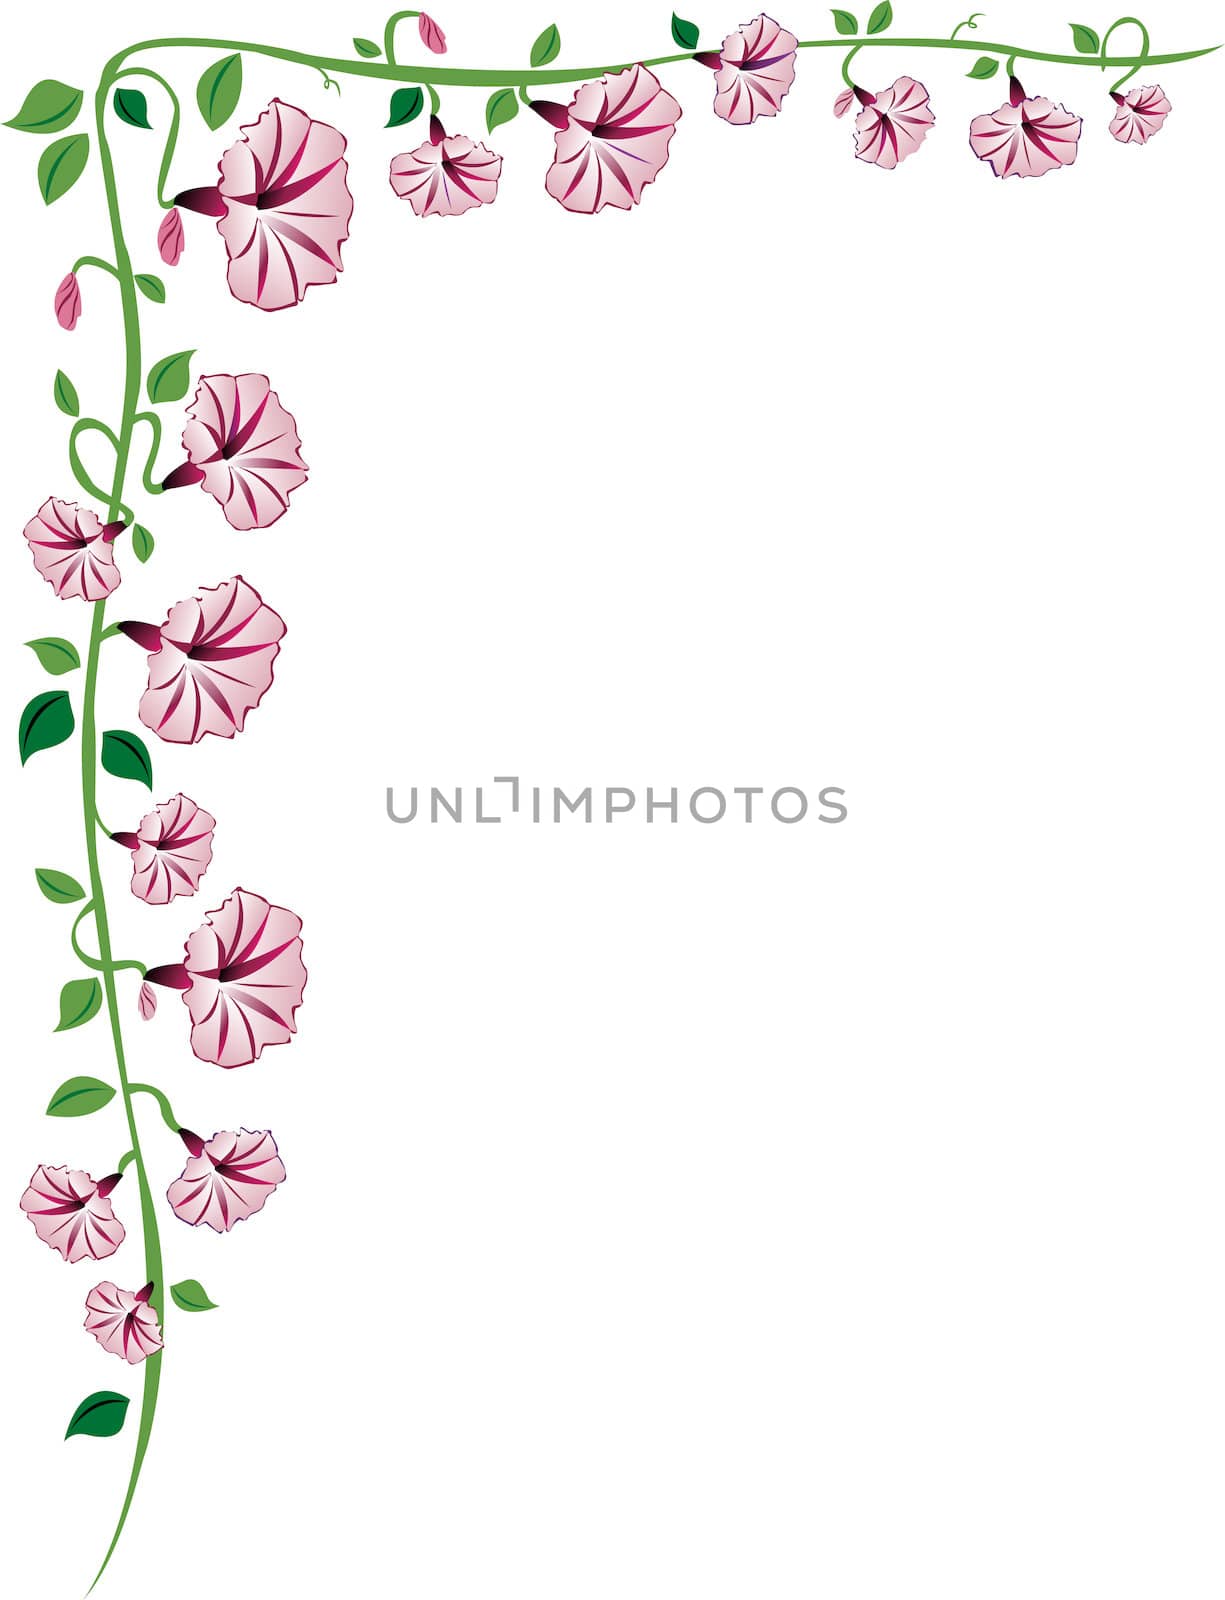 A morning glory vine border with pink flowers, leaves and buds.